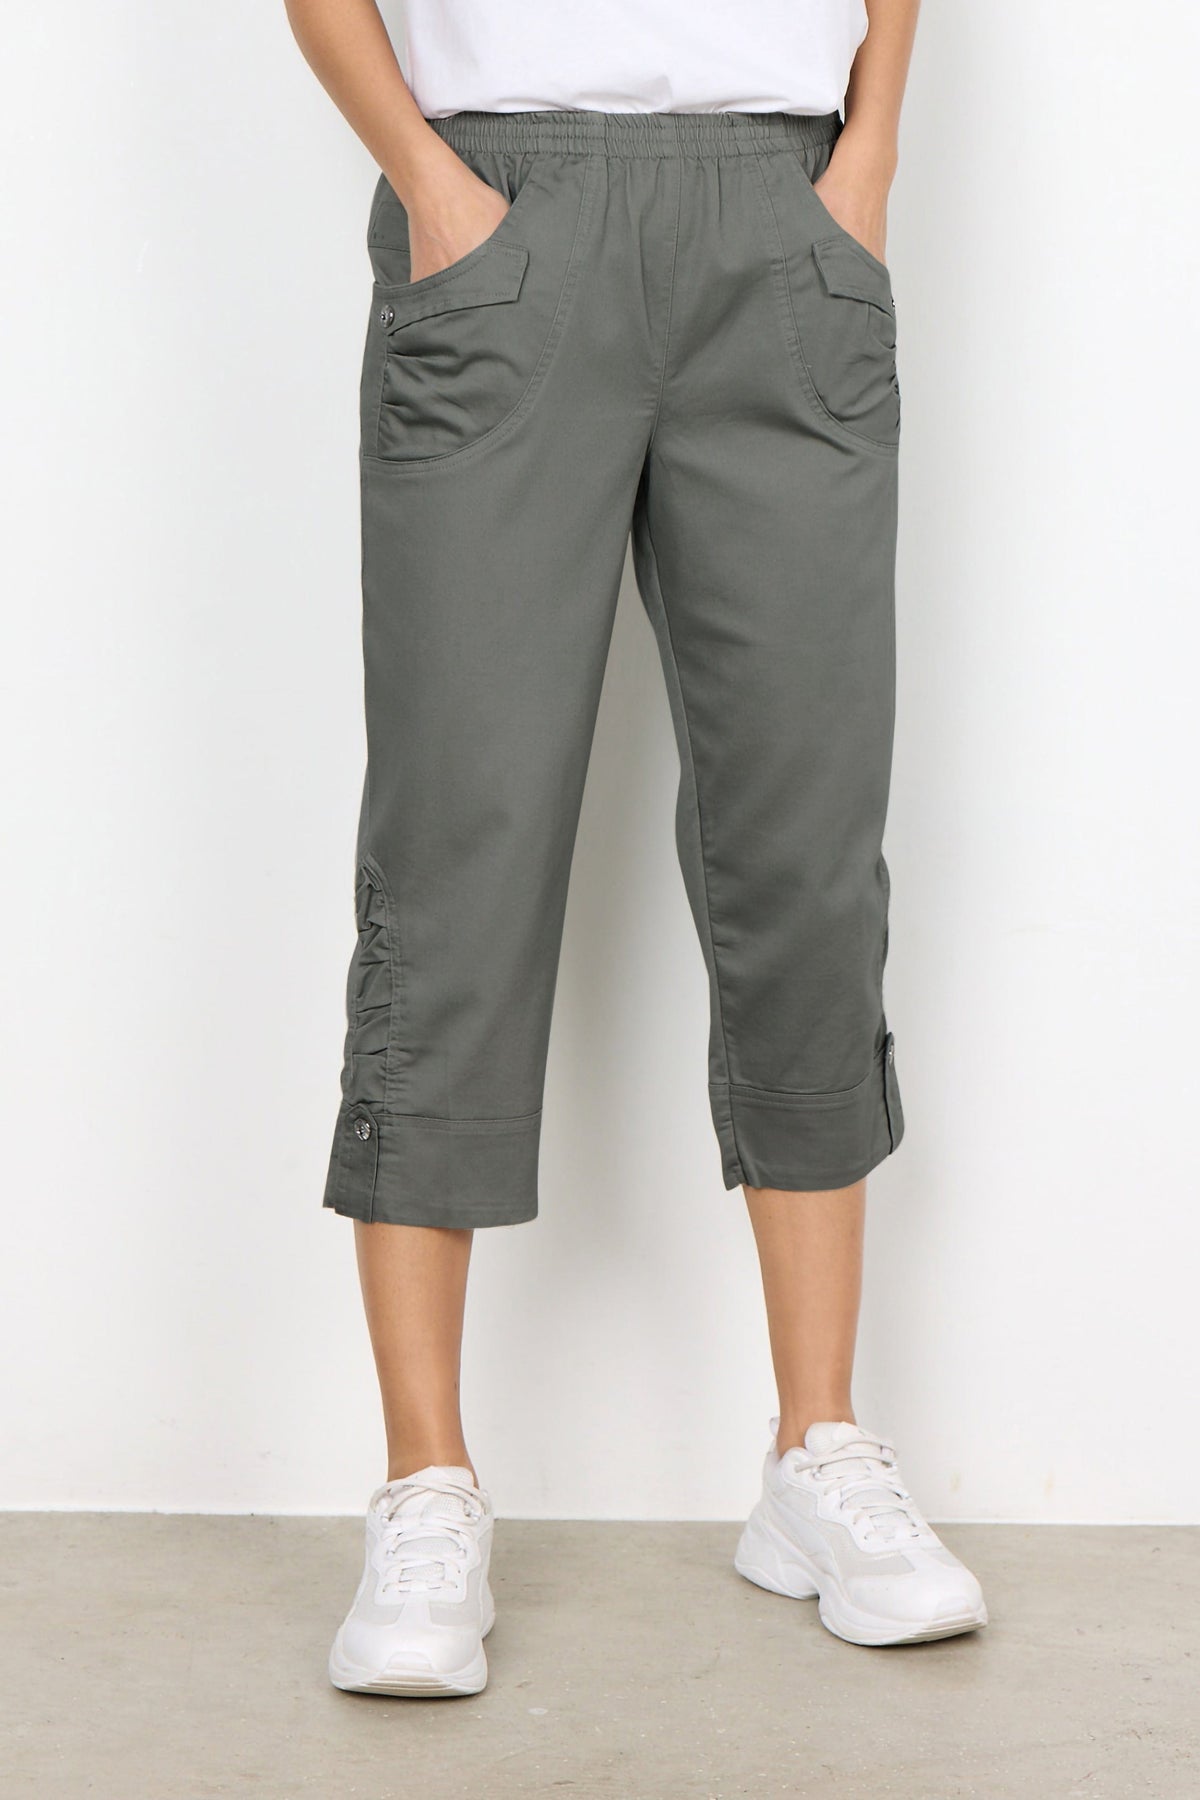 Soyaconcept Turn Up Cuff Crop Trouser